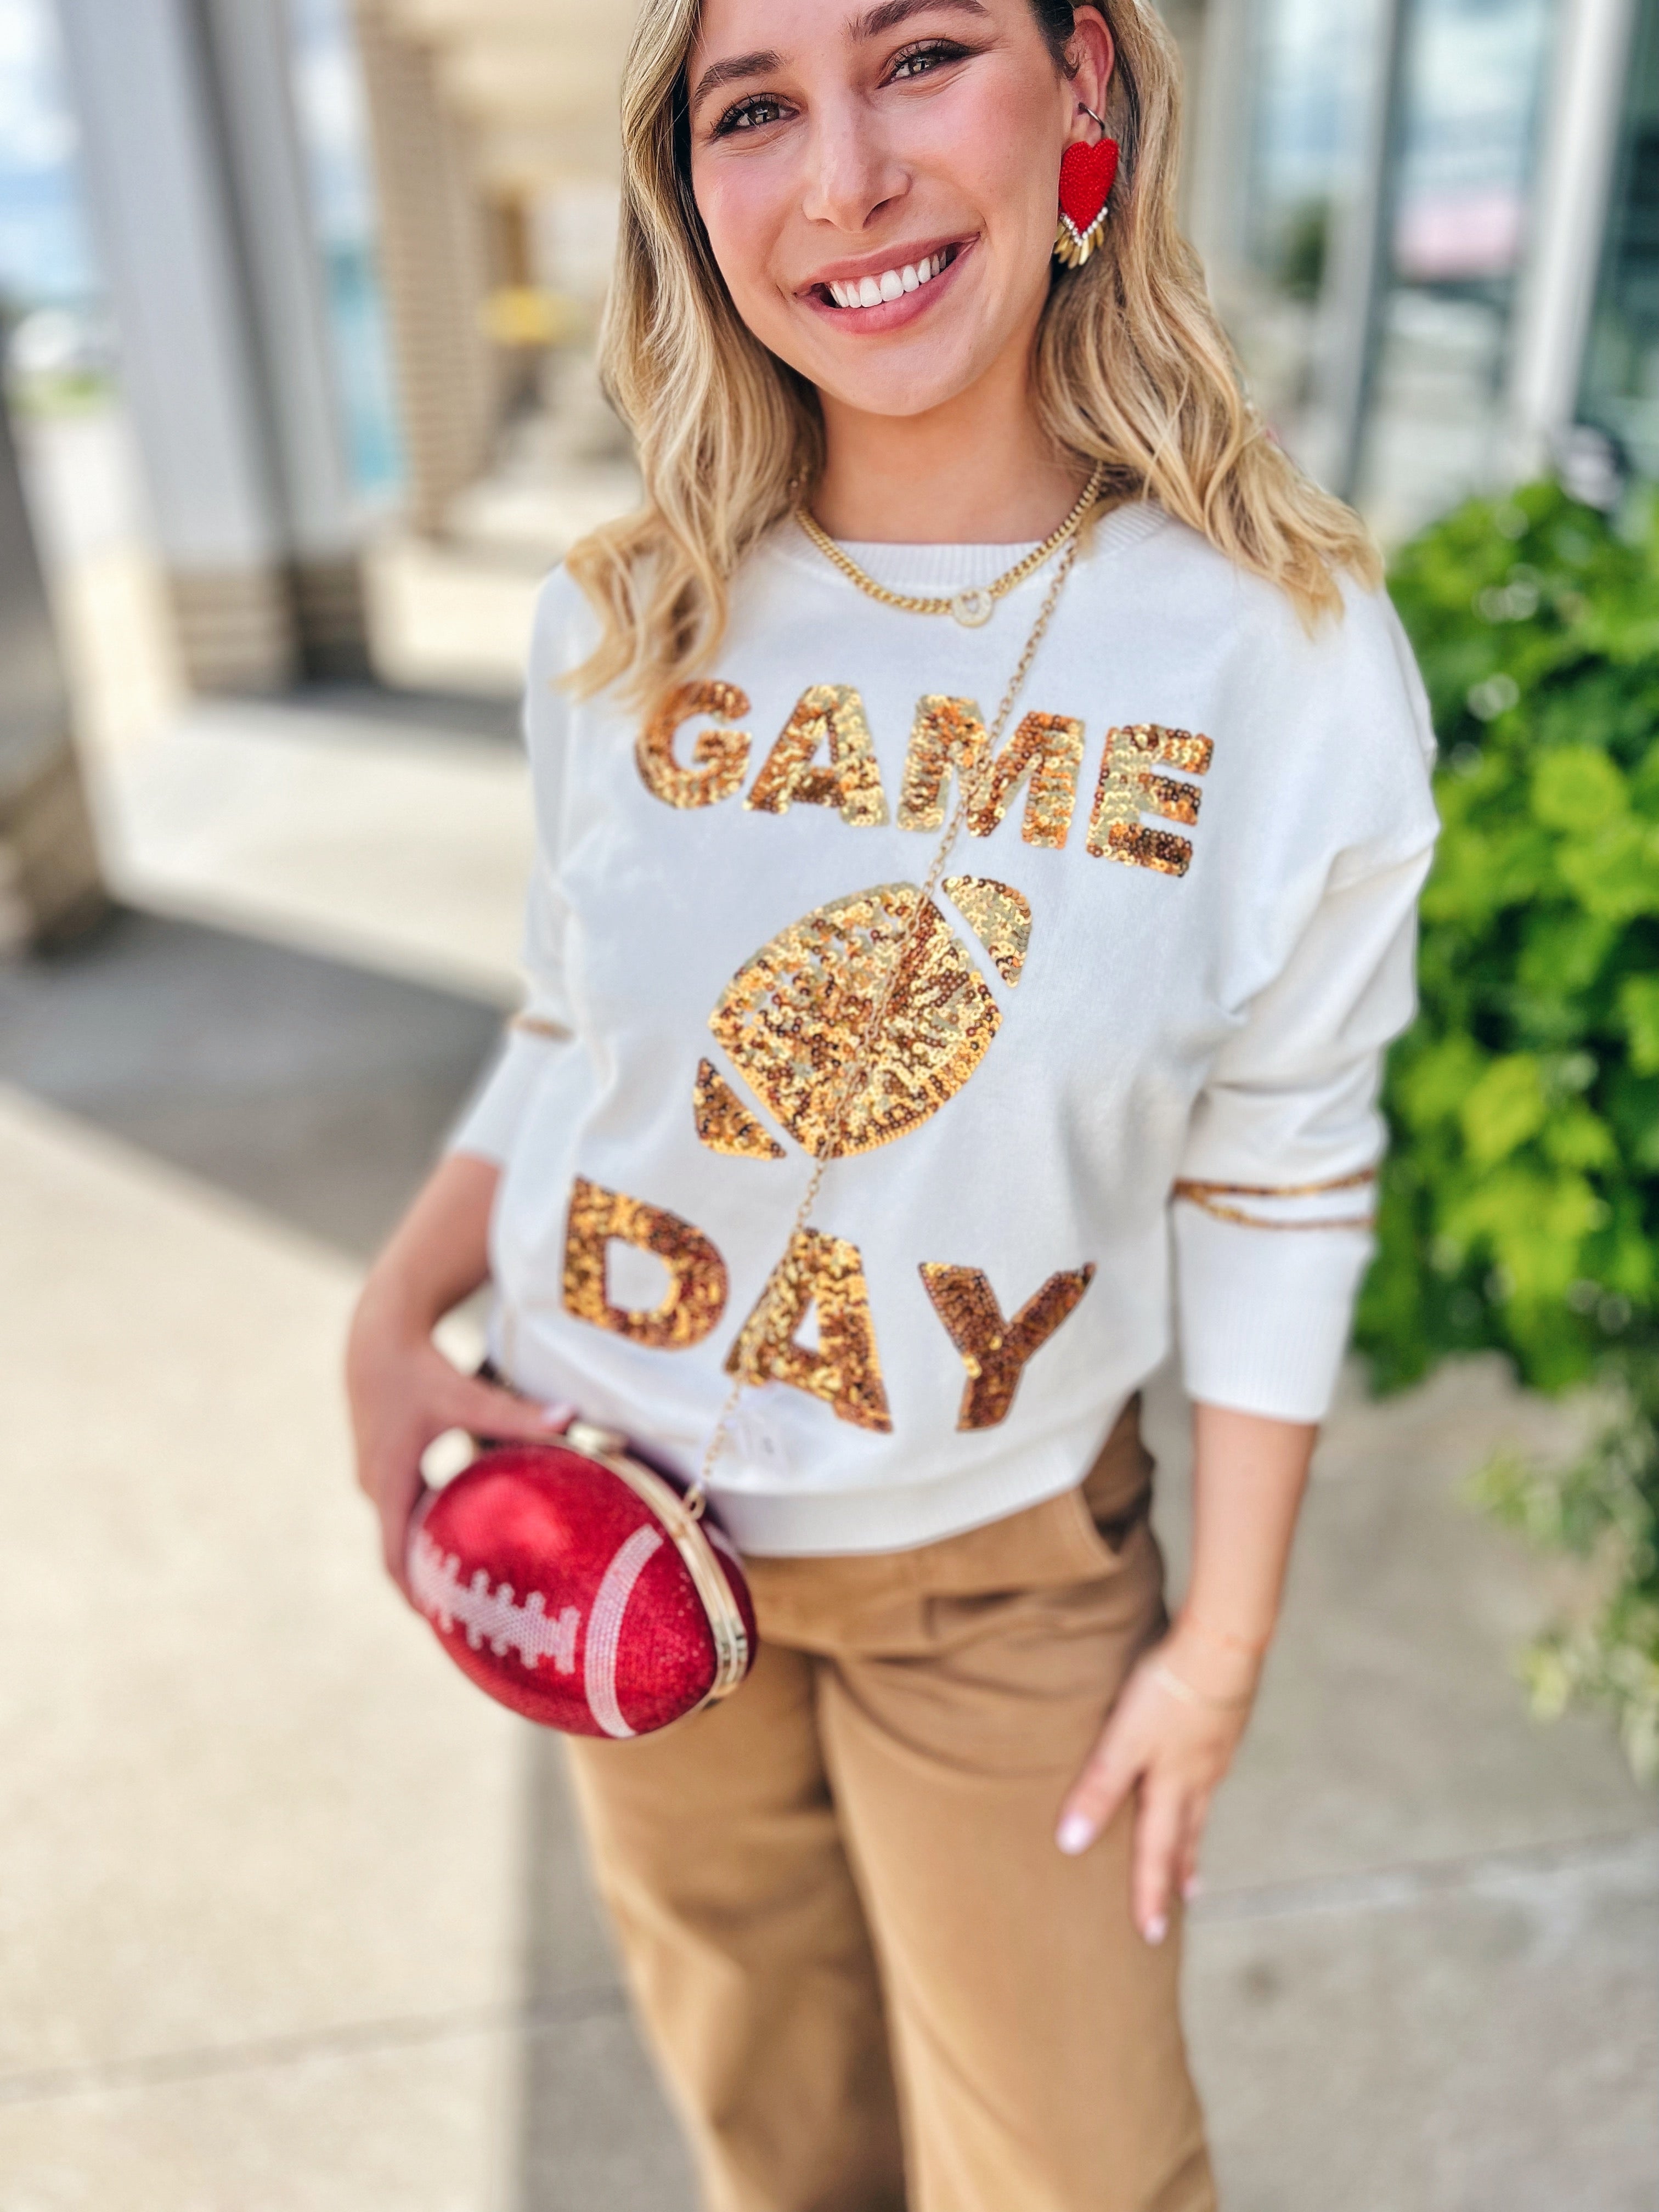 KC Football Earring with Gold Sparkle KC – Amelia's Boutique